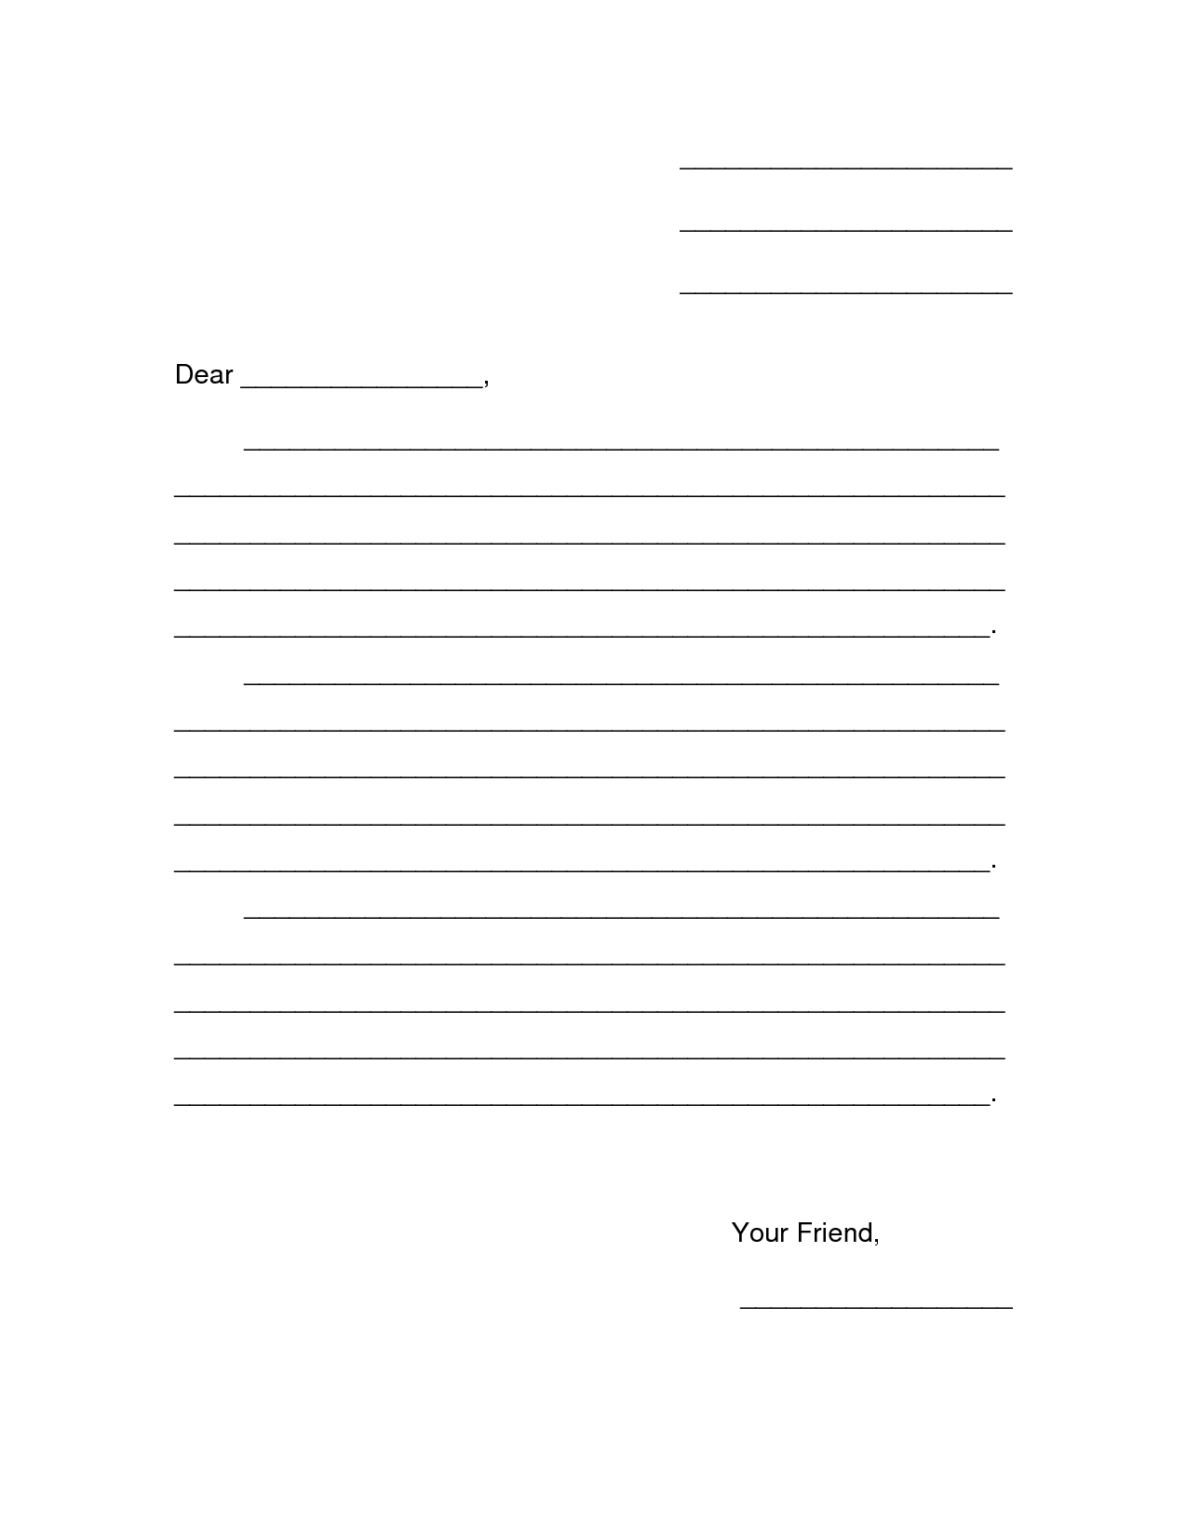 writing-paper-pdf-free-stationery-and-writing-paper-2019-02-26